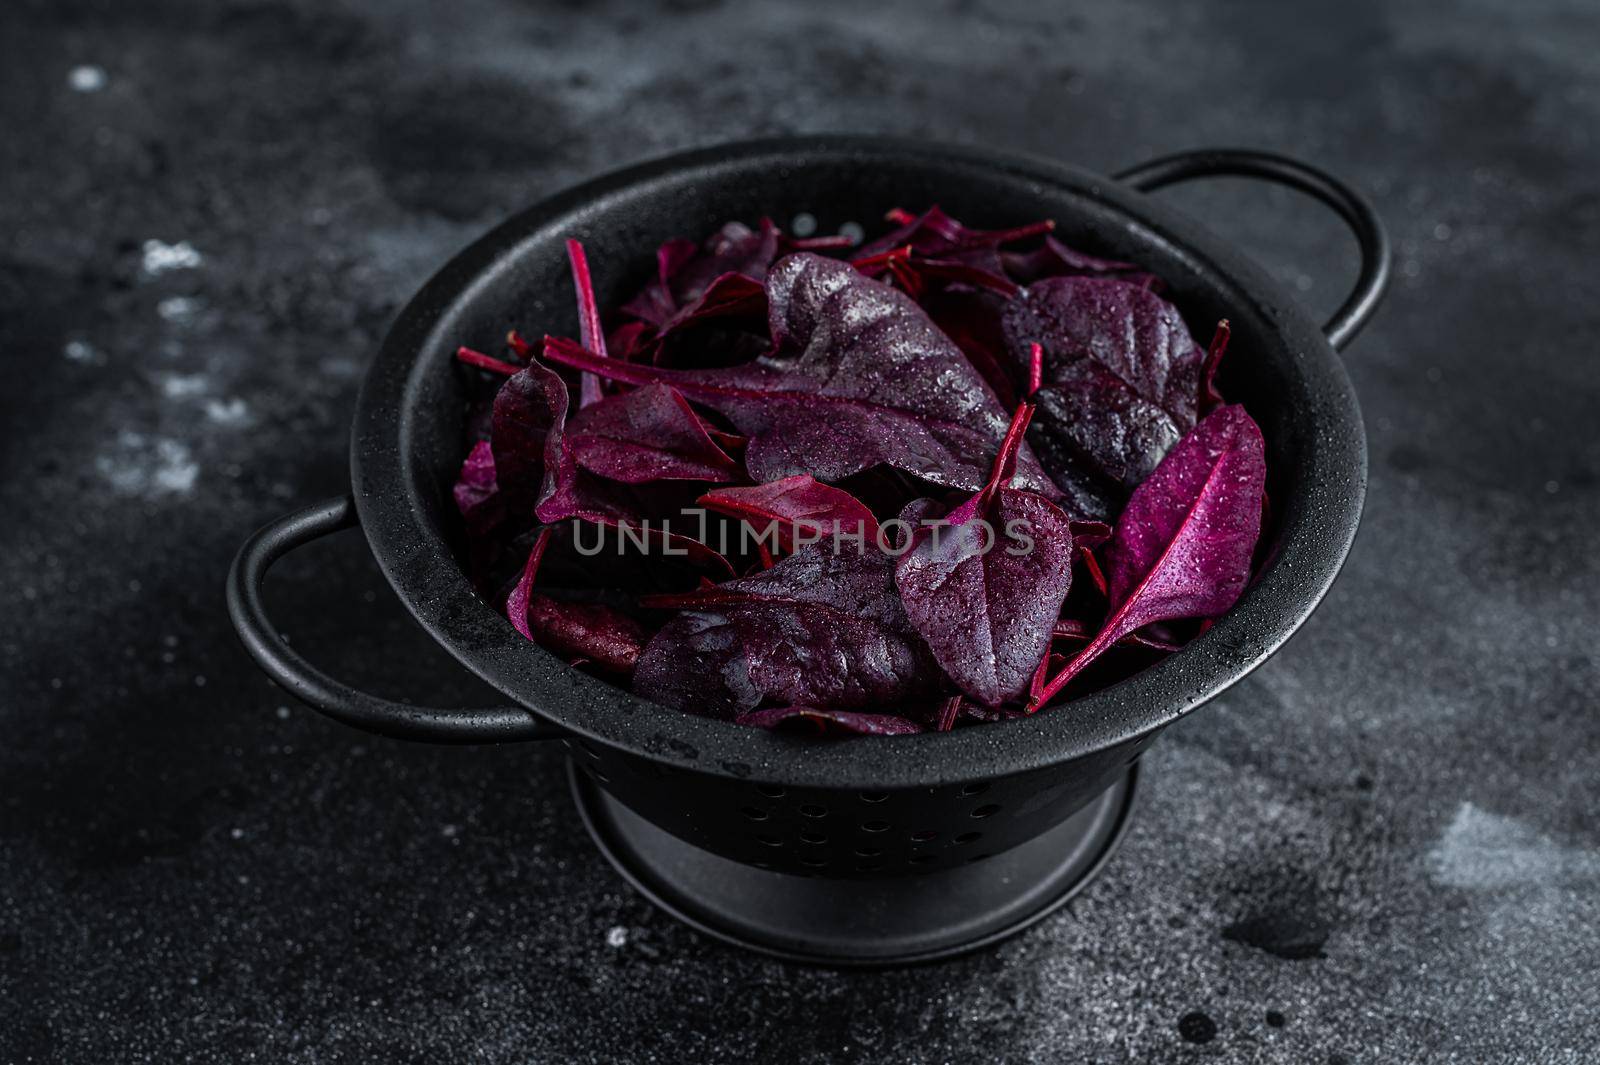 Leaves of Swiss red chard or Mangold salad in a colander. Black background. Top view.